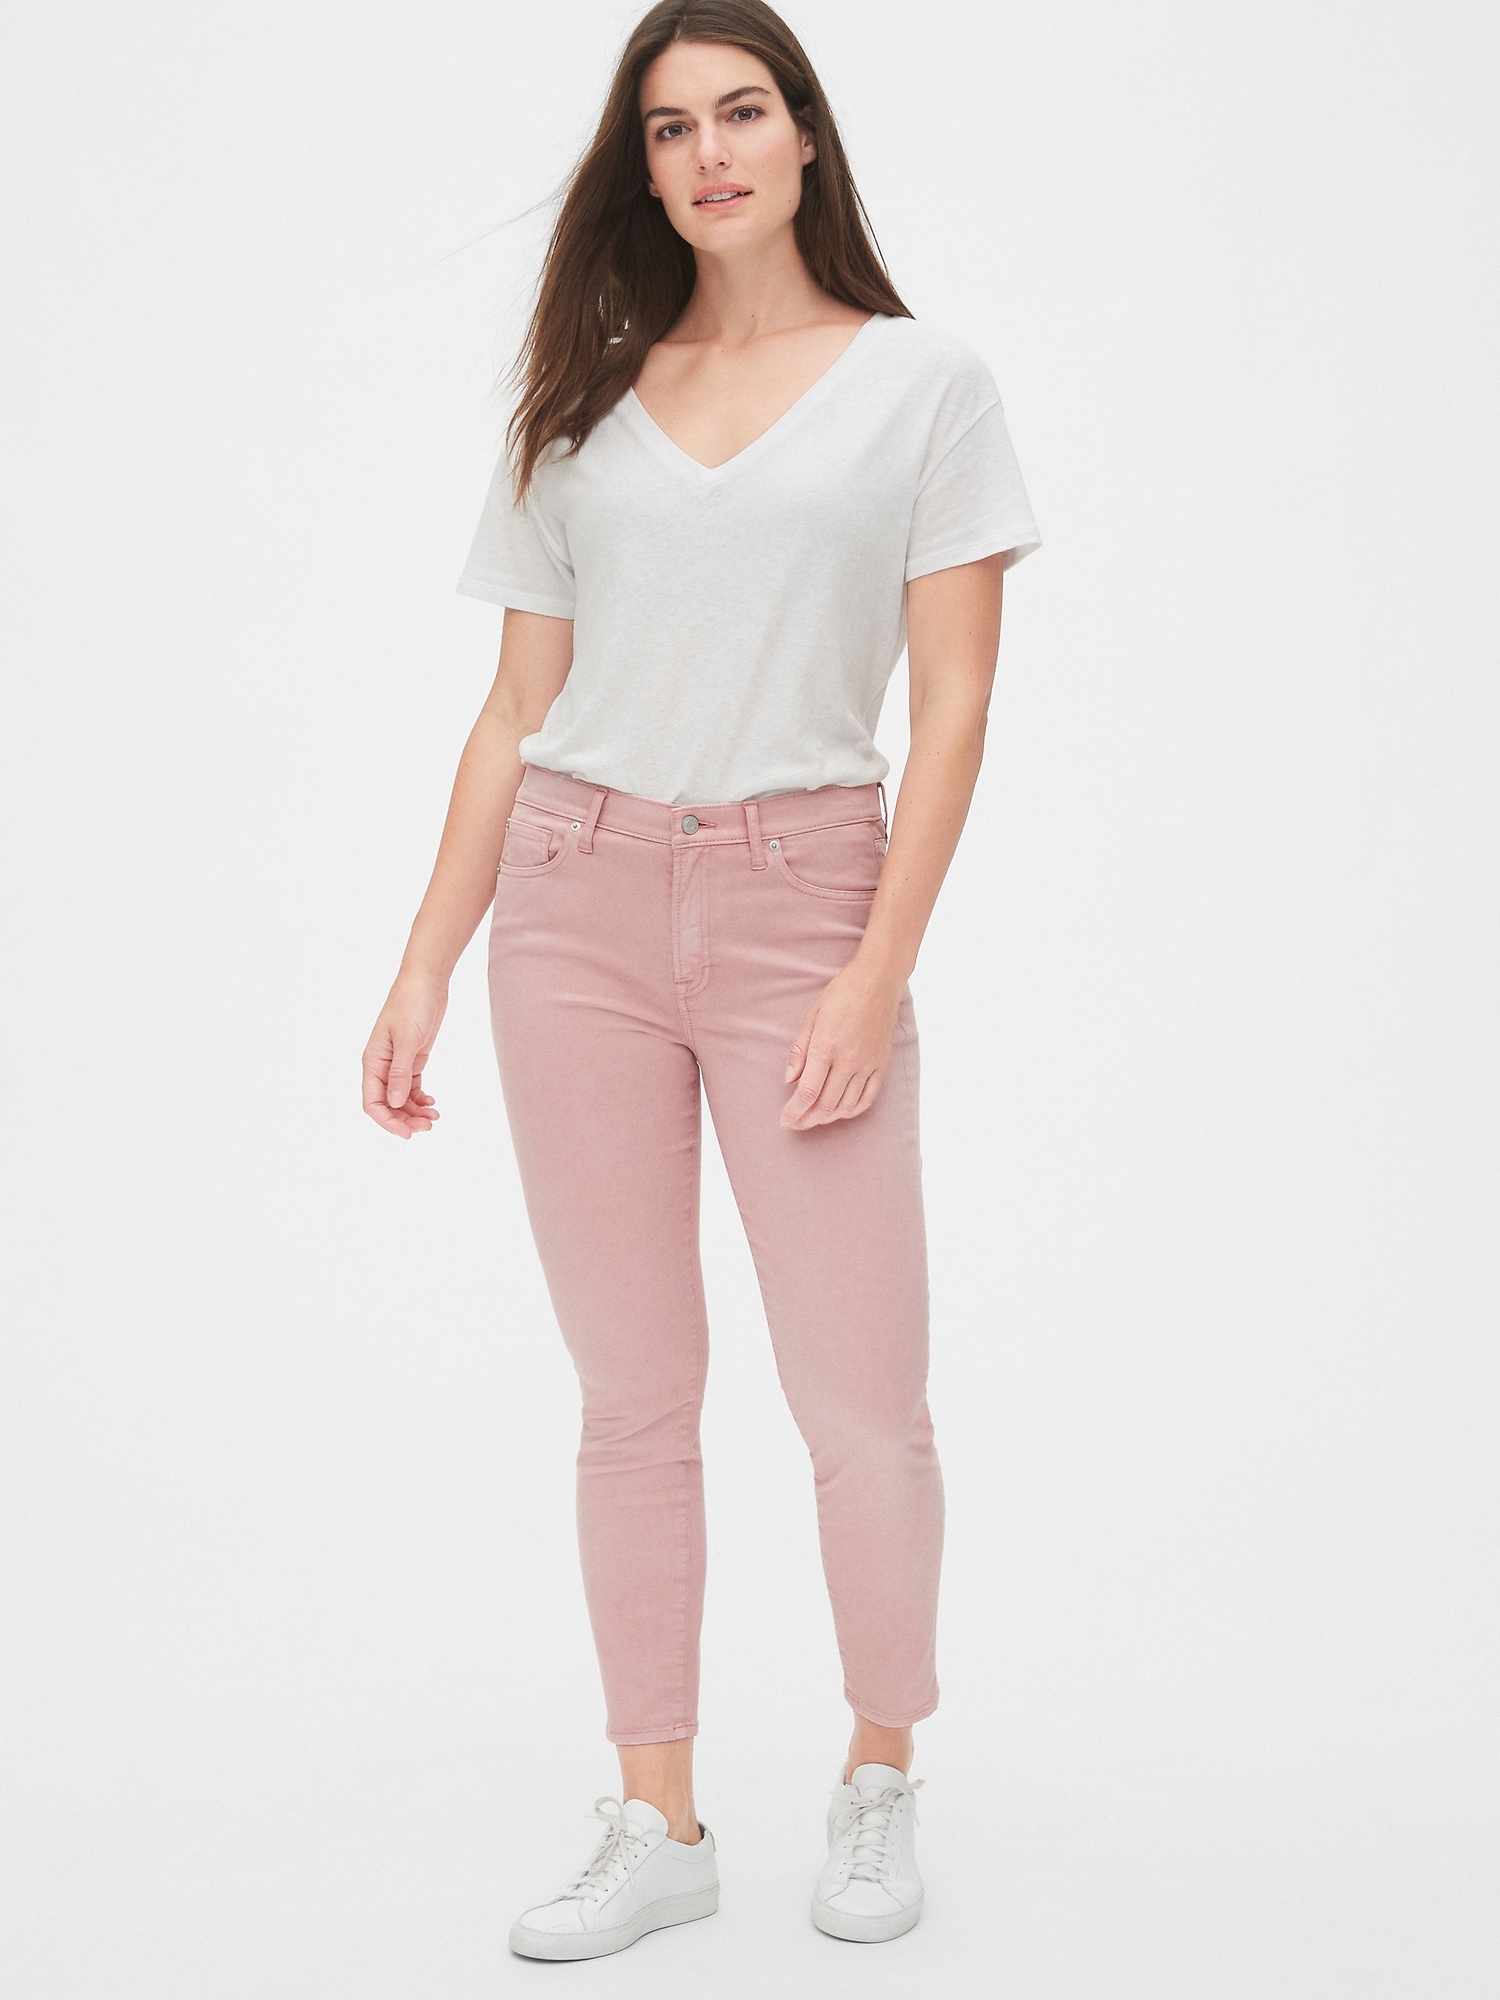 soft pink jeans